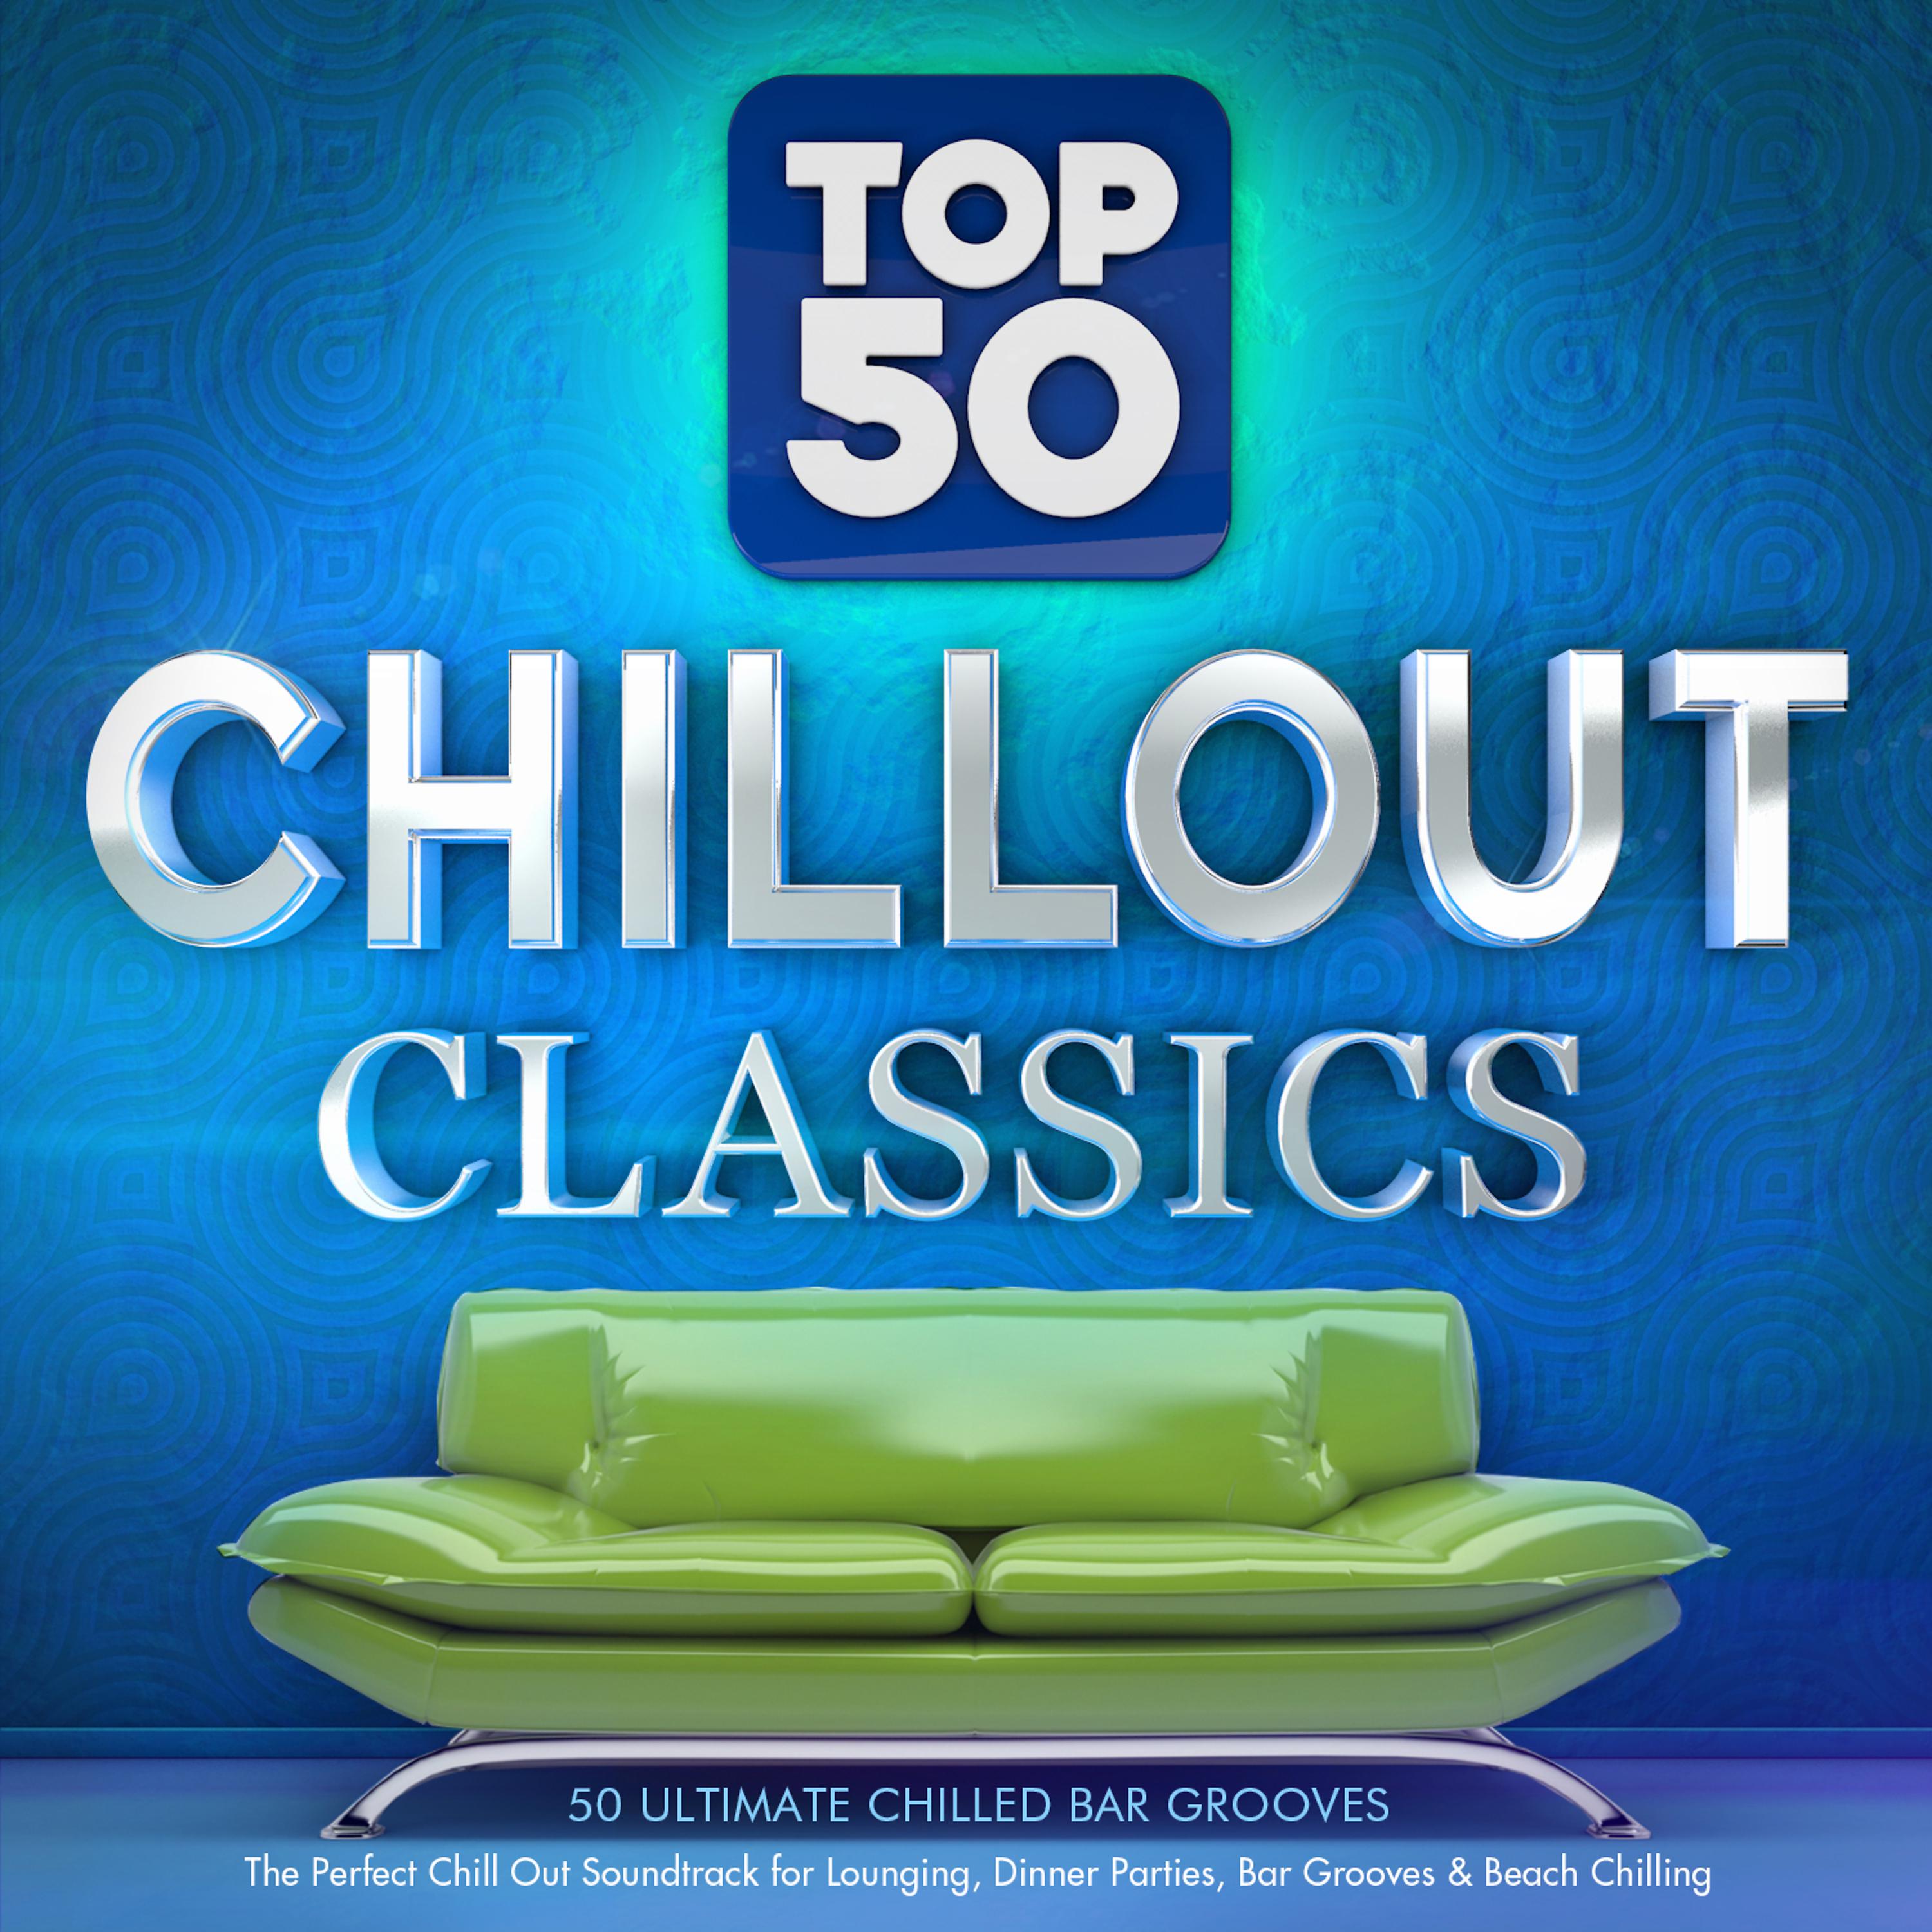 Постер альбома Top 50 Chillout Classics - 50 Ultimate Chilled Bar Grooves - The Perfect Chill out Soundtrack for Lounging, Dinner Parties, Bar Grooves & Beach Chilling